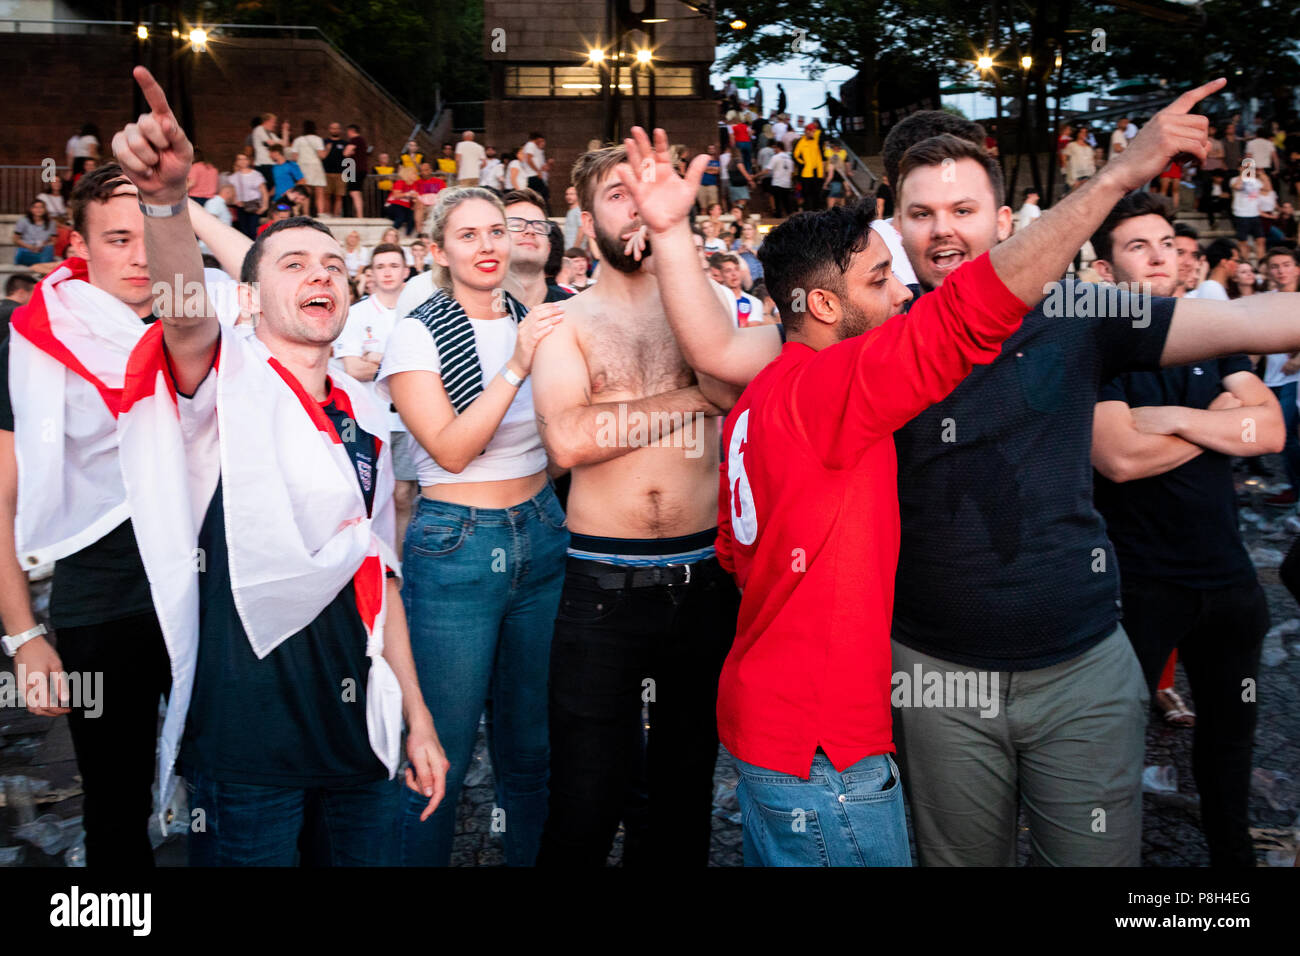 Manchester, UK 11 July 2018. Fans react to FIFA World Cup semi-final match between England and Croatia at the Auto Trader World Cup screening. Credit: Andy Barton/Alamy Live News  Stock Photo